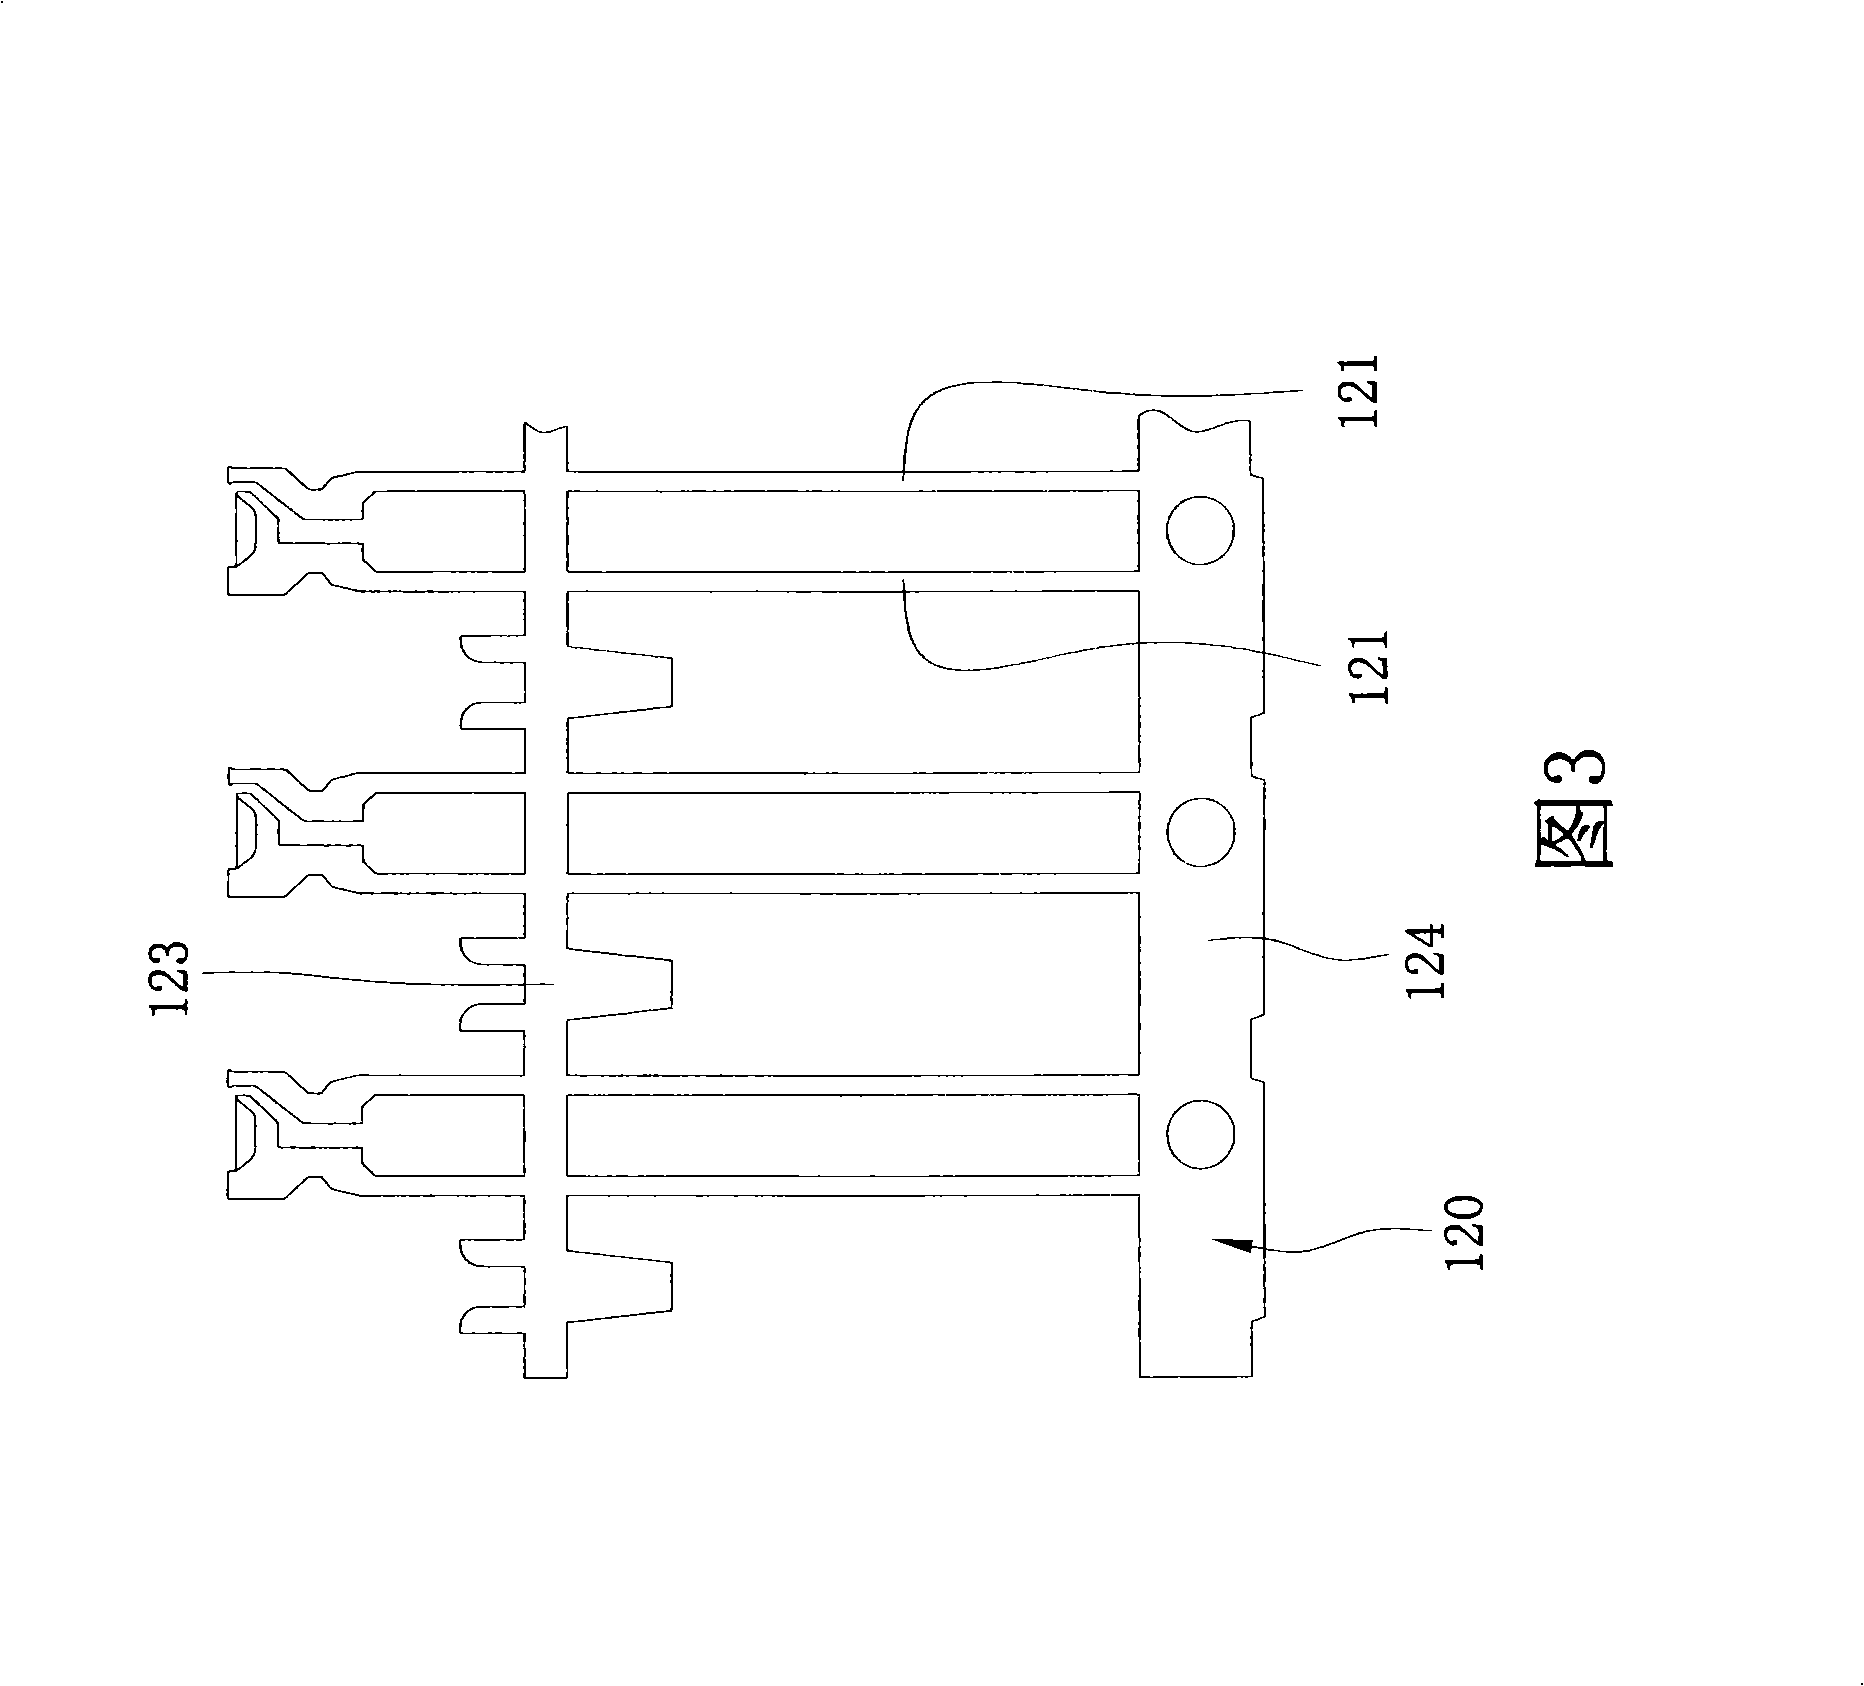 Preparation method for LED and tool for preparing the LED